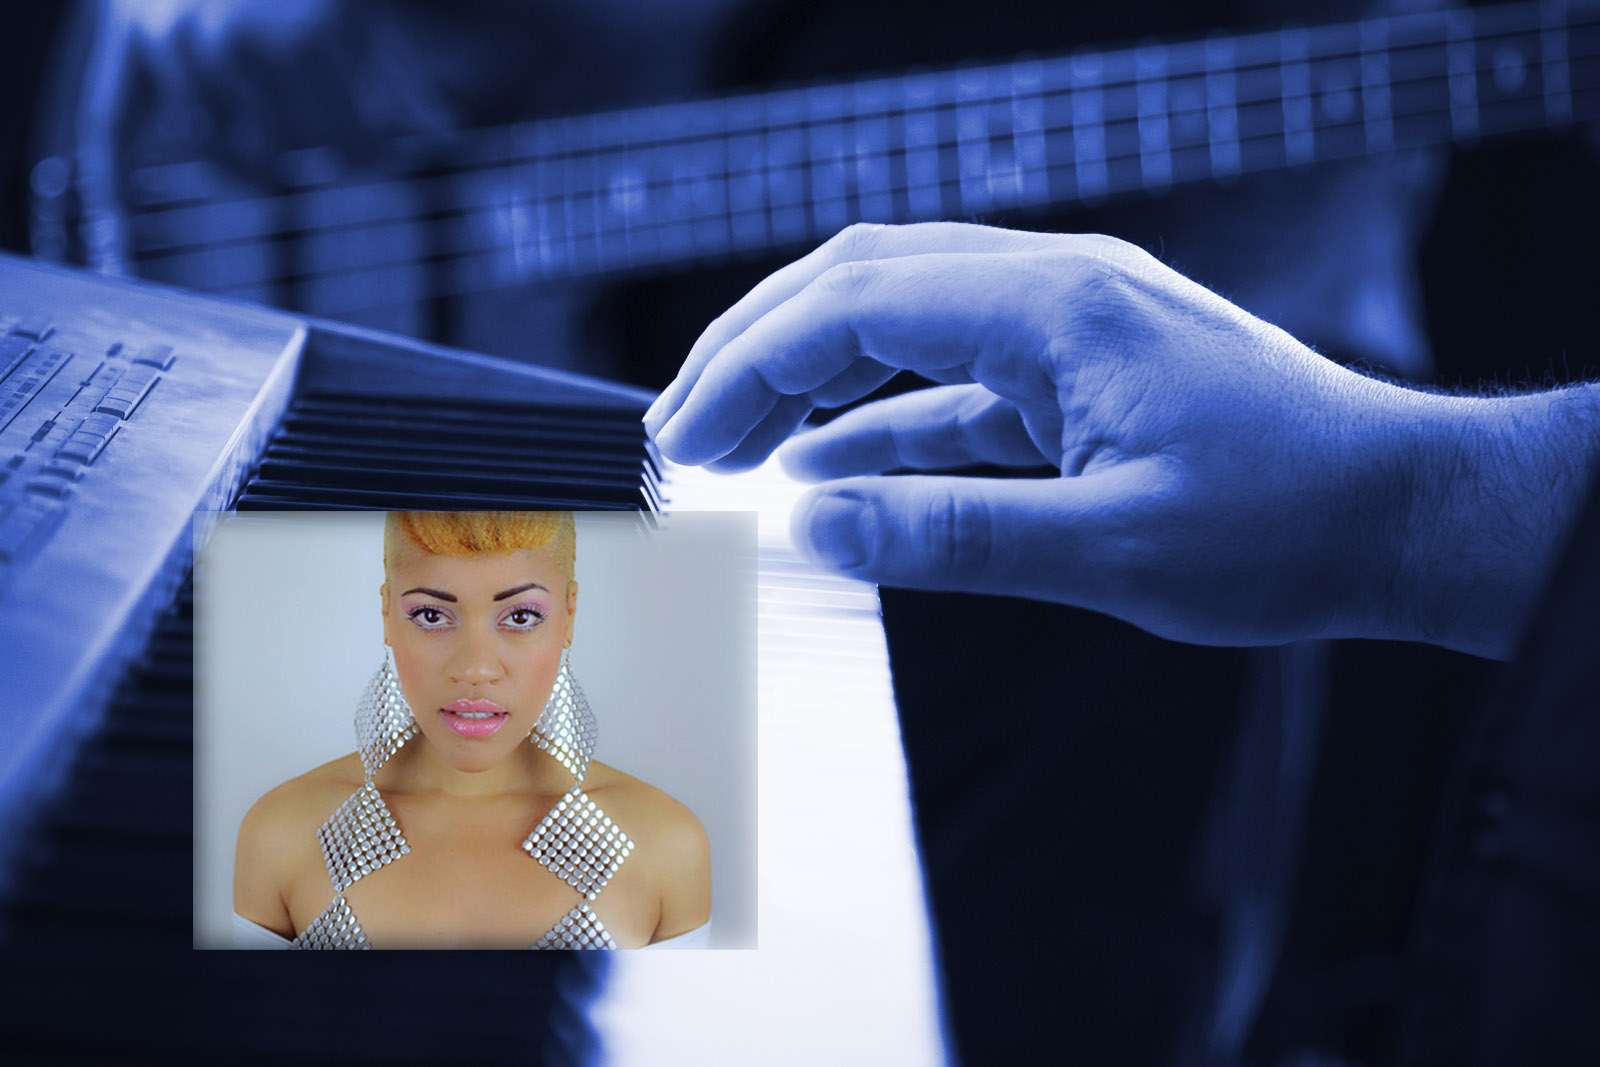 image of playing the piano with bass guitarist in background. Plus image of Élan Noelle.